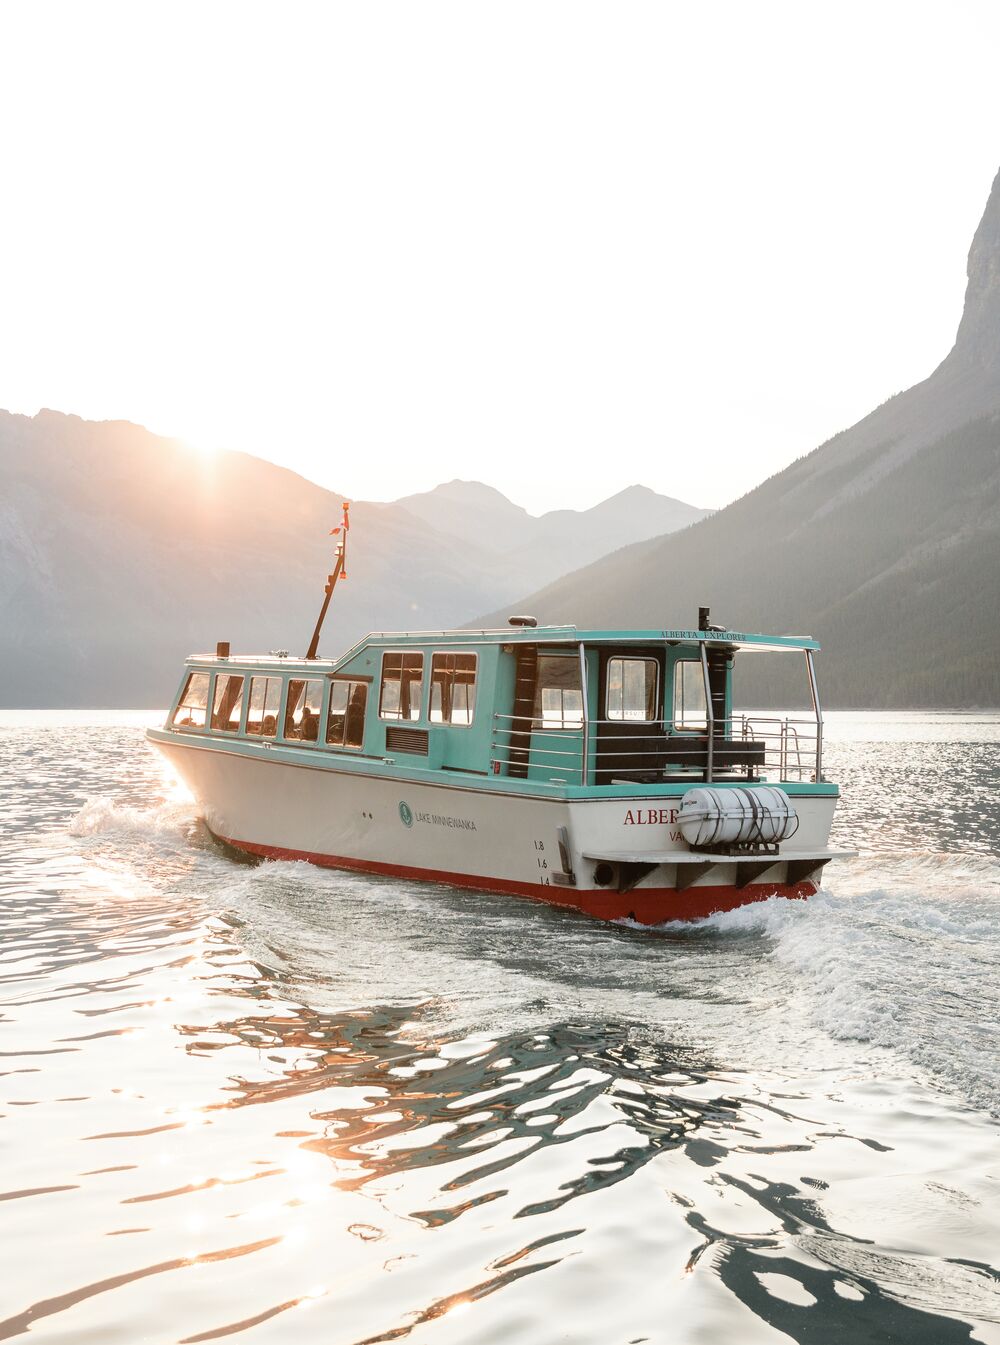 A boat cruise on Lake Minnewanka at sunset with mountains in the background